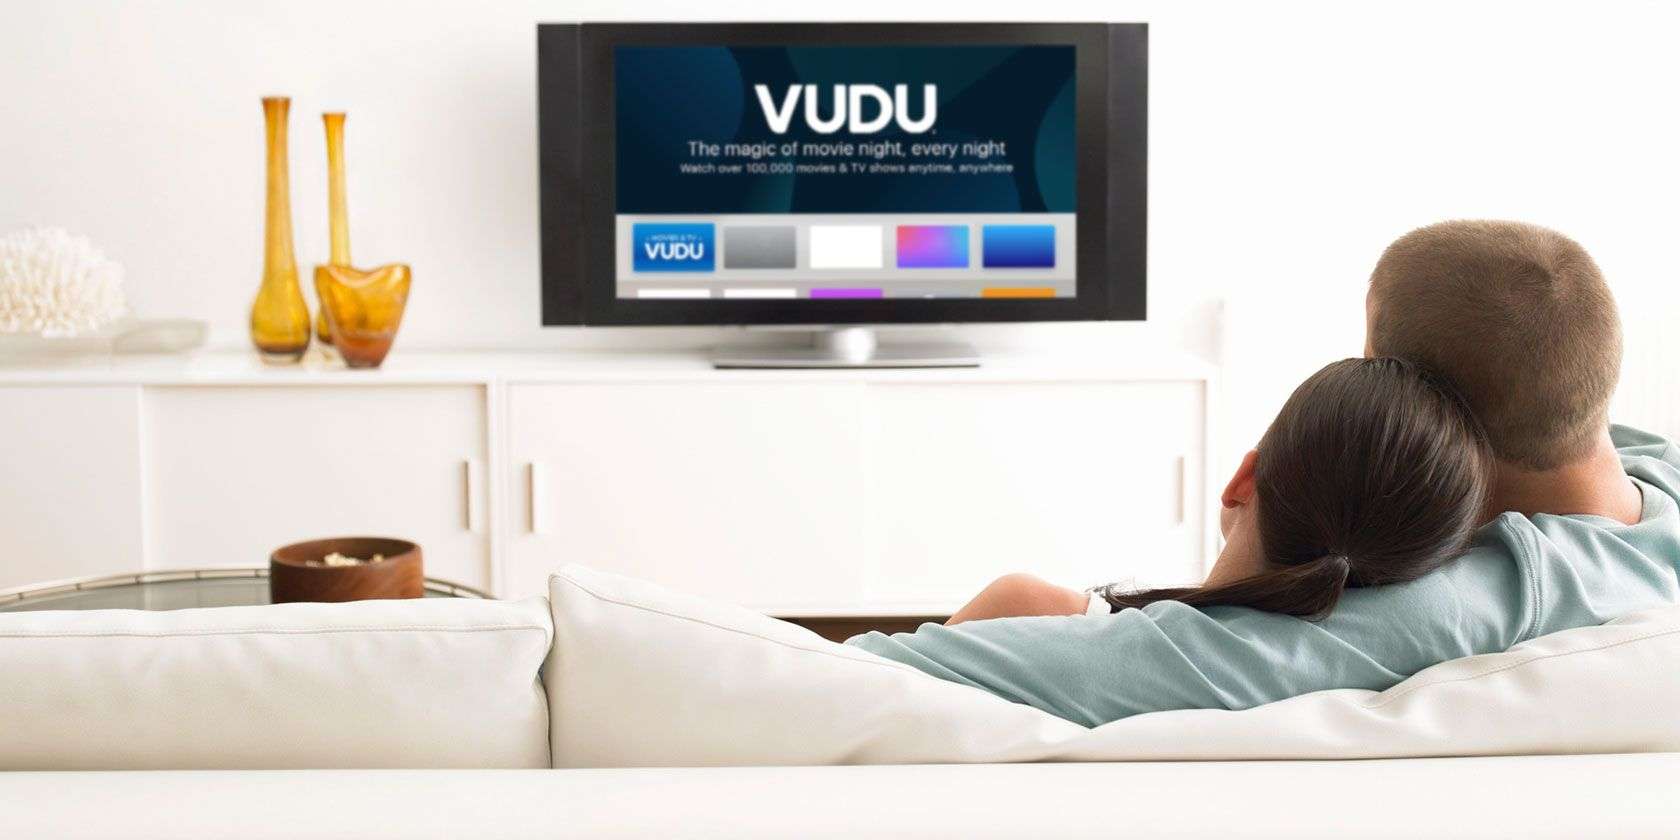 What Is Vudu and How Does It Work?